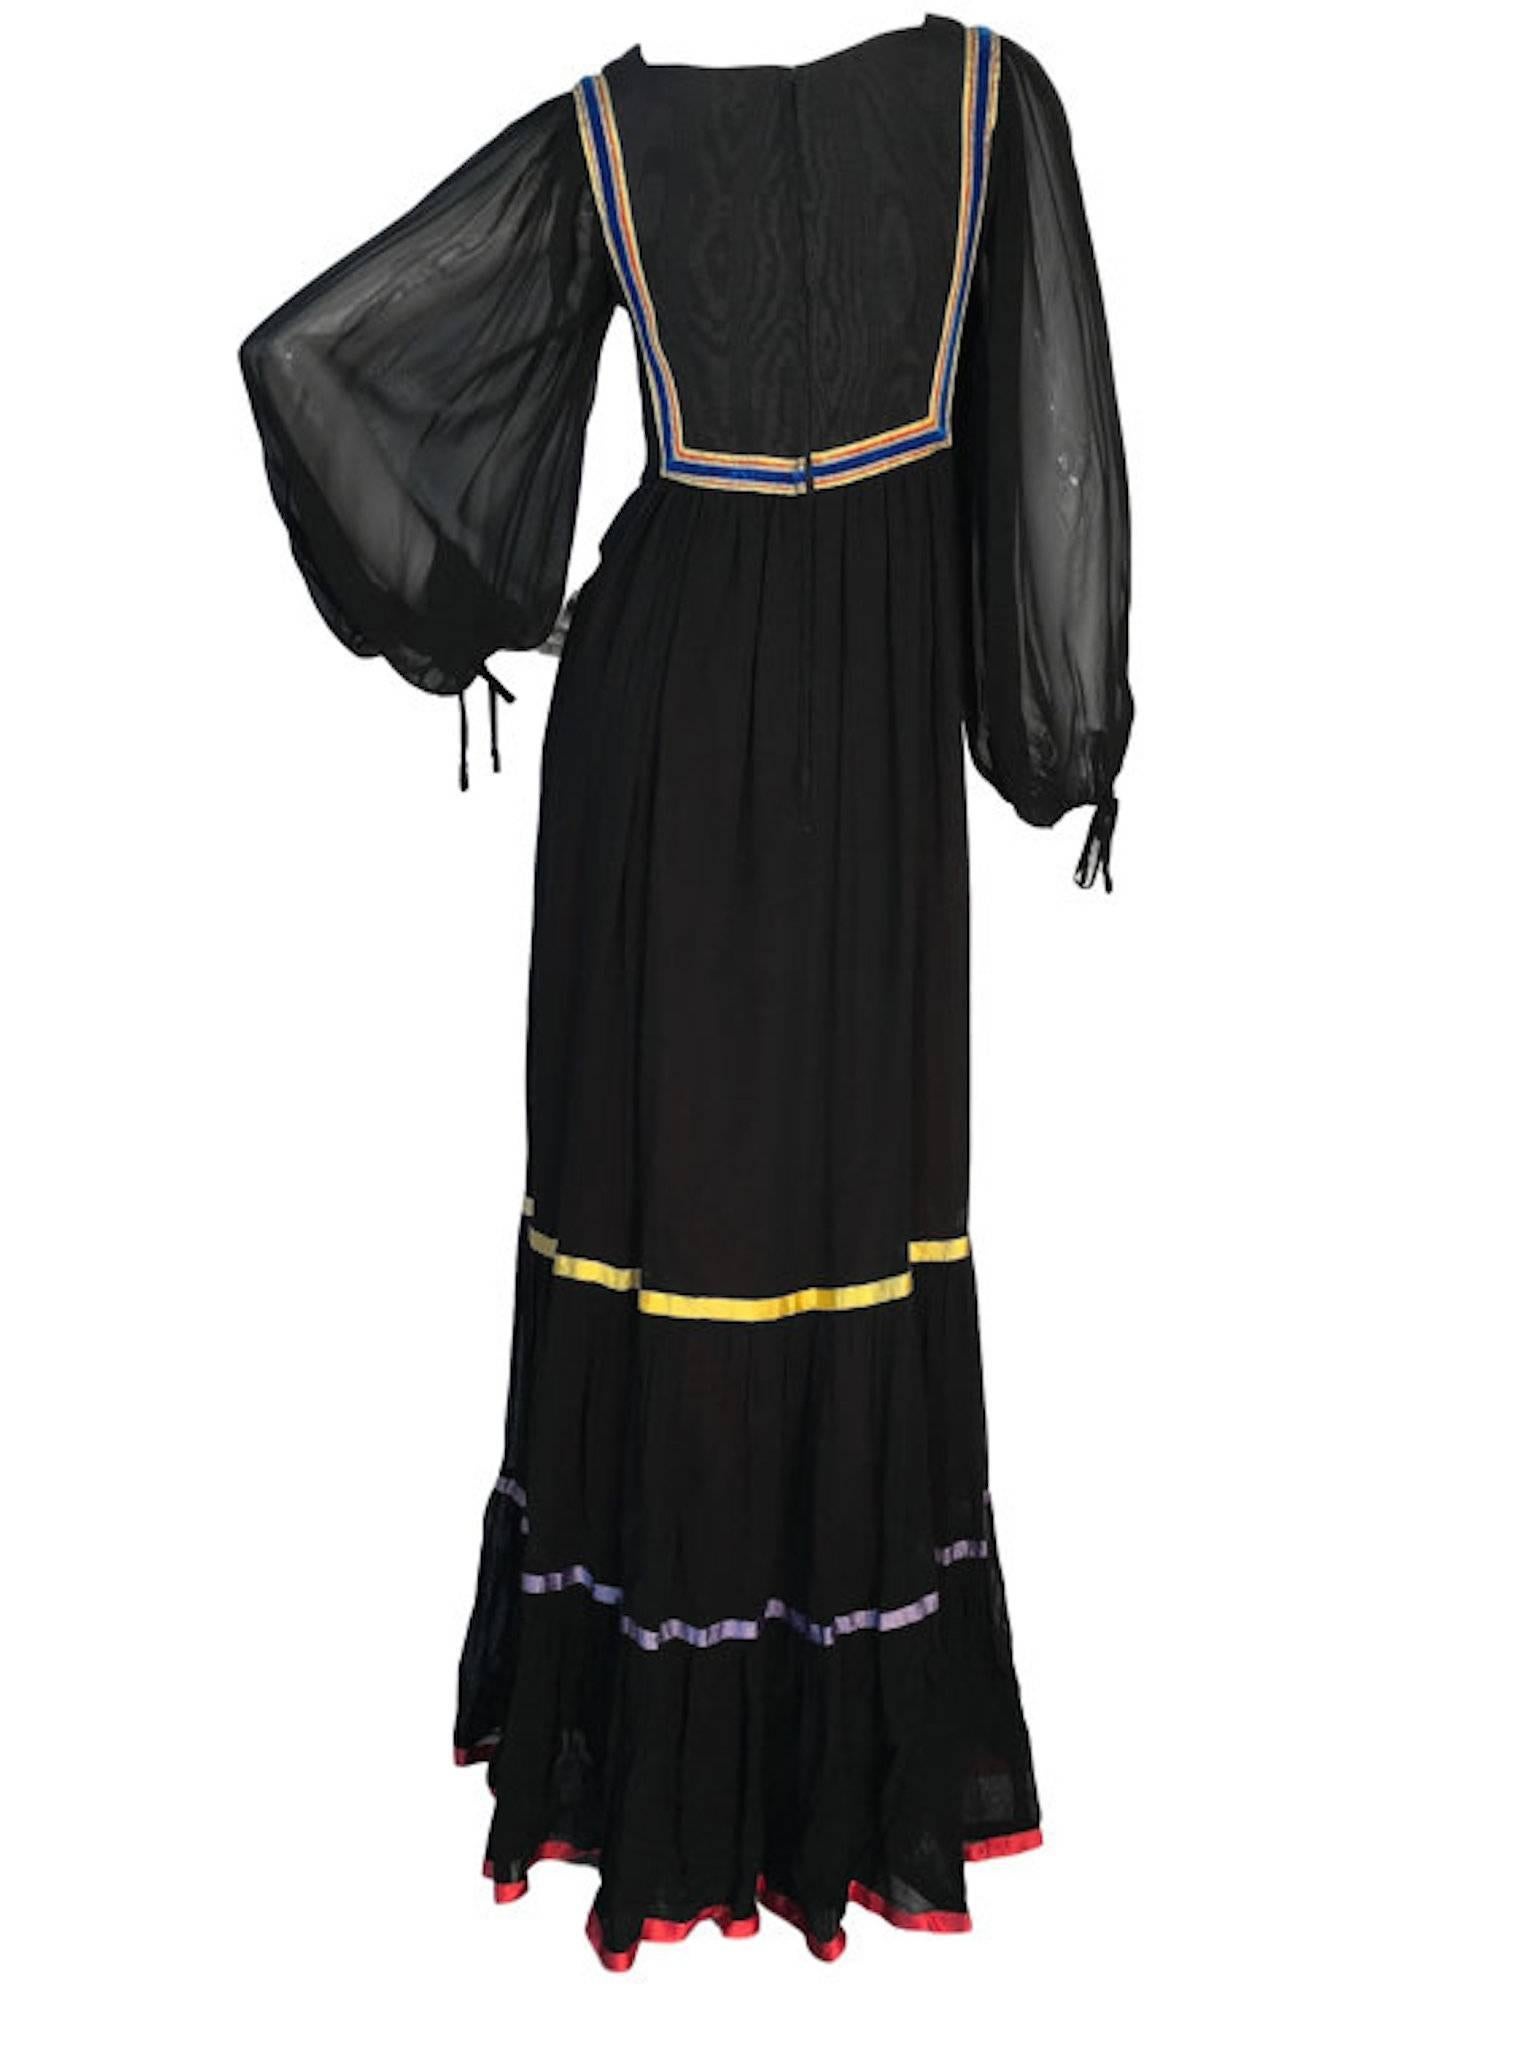 Rumak & Sample black maxi peasant style dress, with bishop sleeves, embroidered bodice, ribbon satin and velvet trims.

Size UK 8/10  Measuring 17 inches across bust, 14.5 inches across waist and 59 inches length. 

Very good condition, some damage